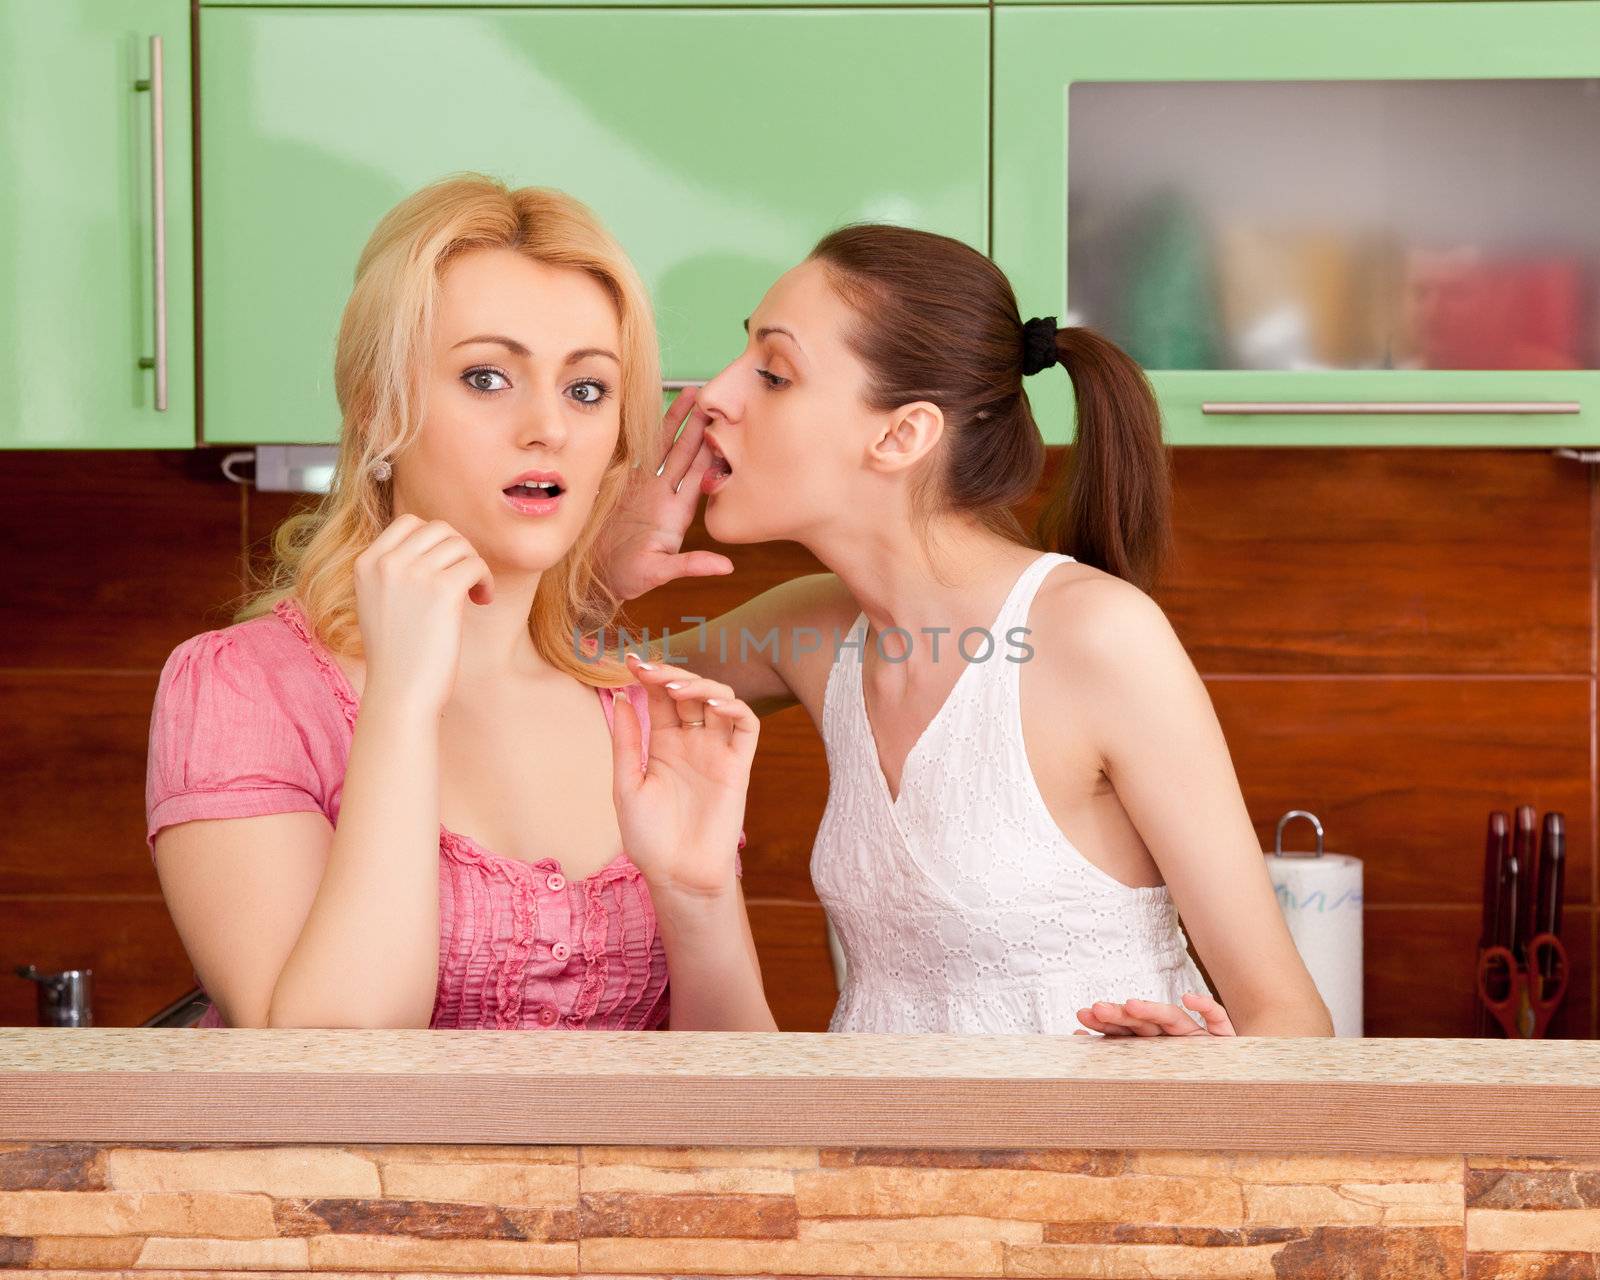 two girls gossiping in the kitchen interior